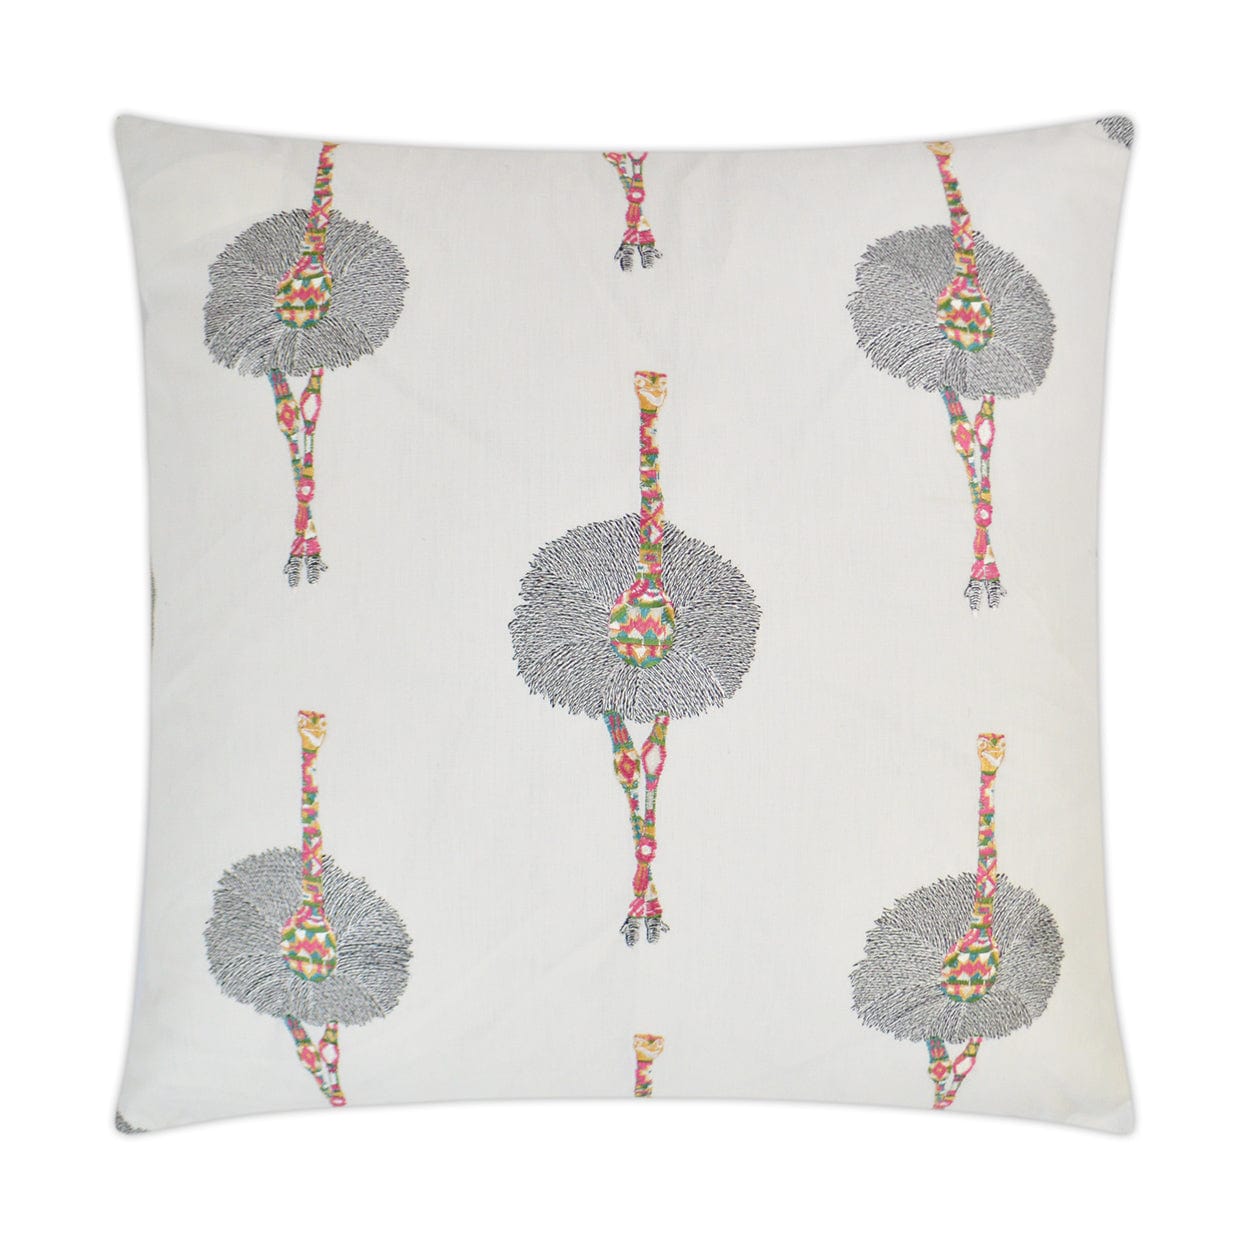 Ruffles and Feathers Pillow